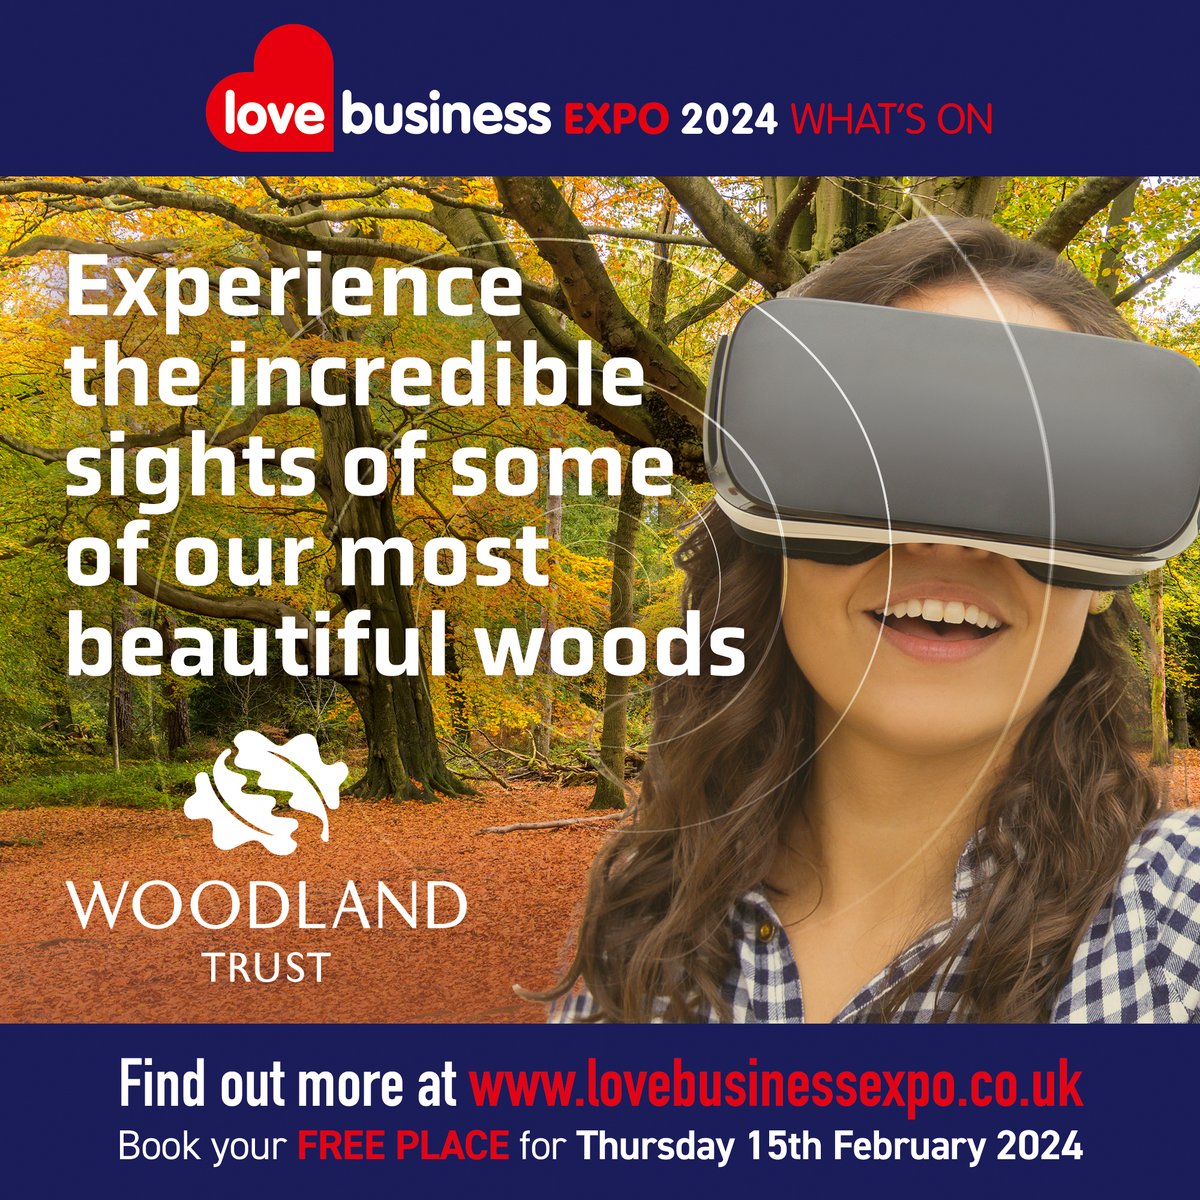 Experience the incredible sights of the Woodland Trust's most beautiful woods with VR technology at Love Business EXPO 2024 on Thursday, February 15th. Book your FREE delegate ticket for Love Business EXPO 2024. lovebusinessexpo.co.uk